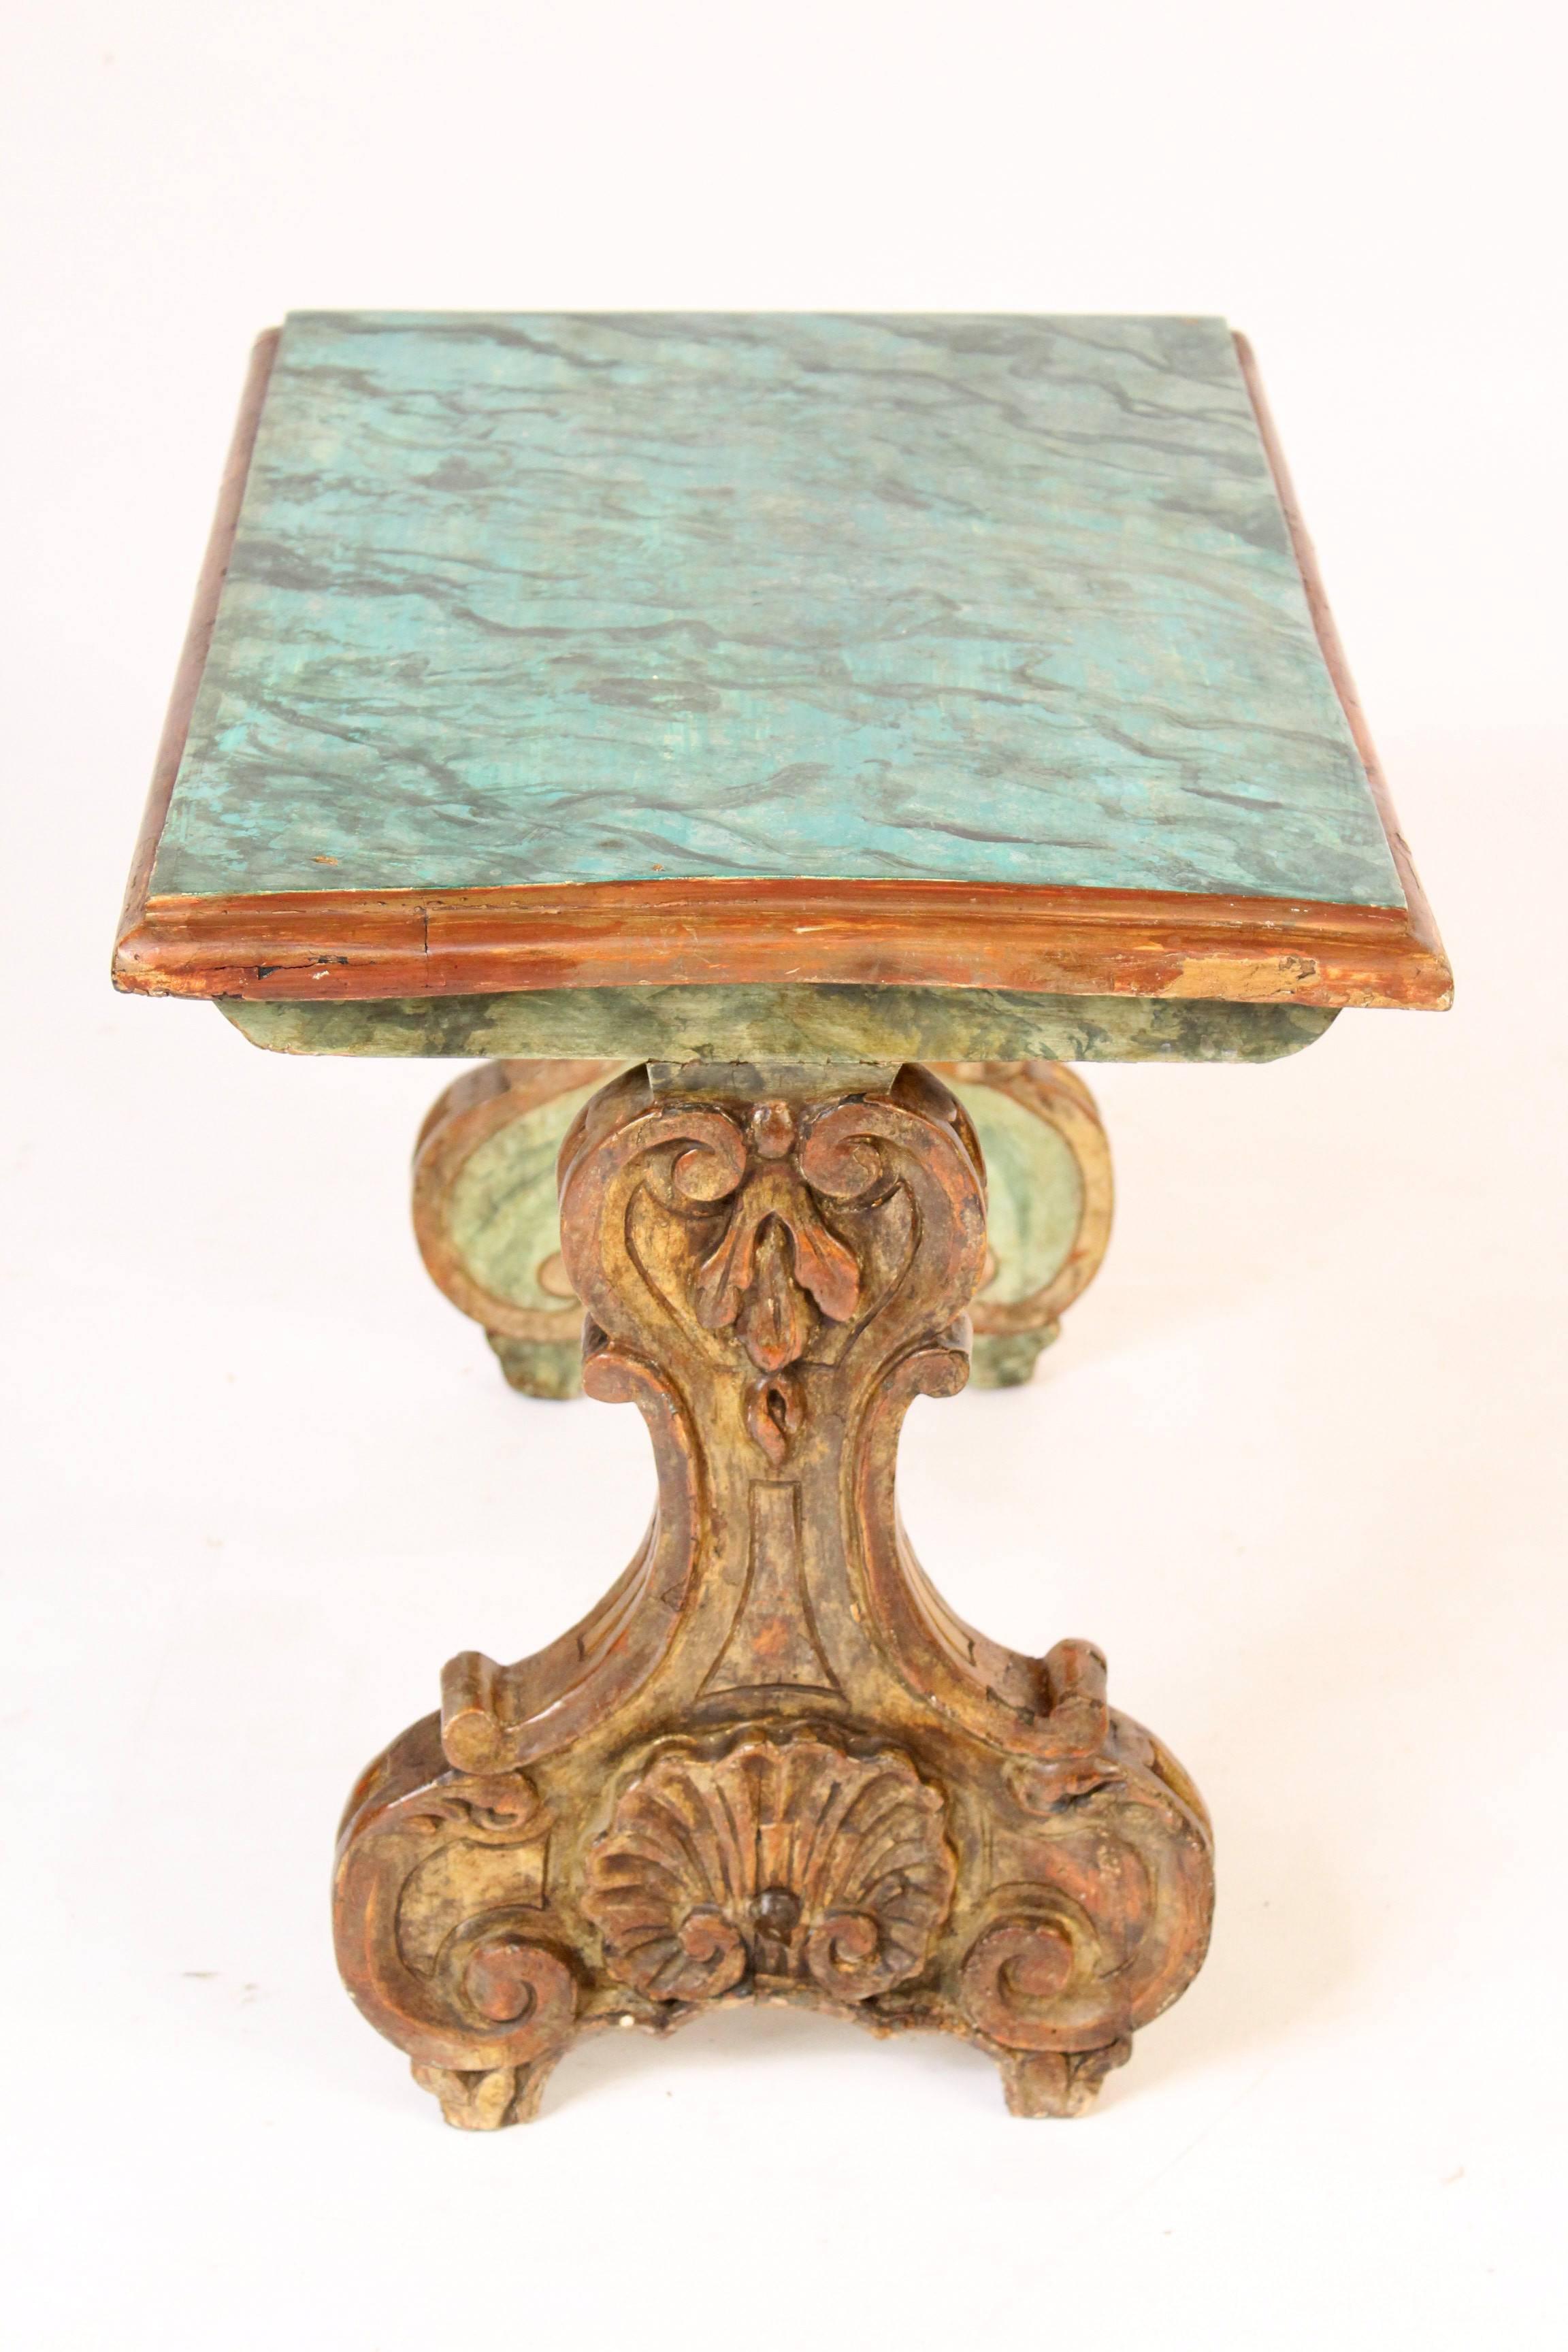 Baroque style partial-gilt end table with a painted faux malachite top, made from antique elements, assembled circa 1920. This table is waiting to add a splash of color to your room.